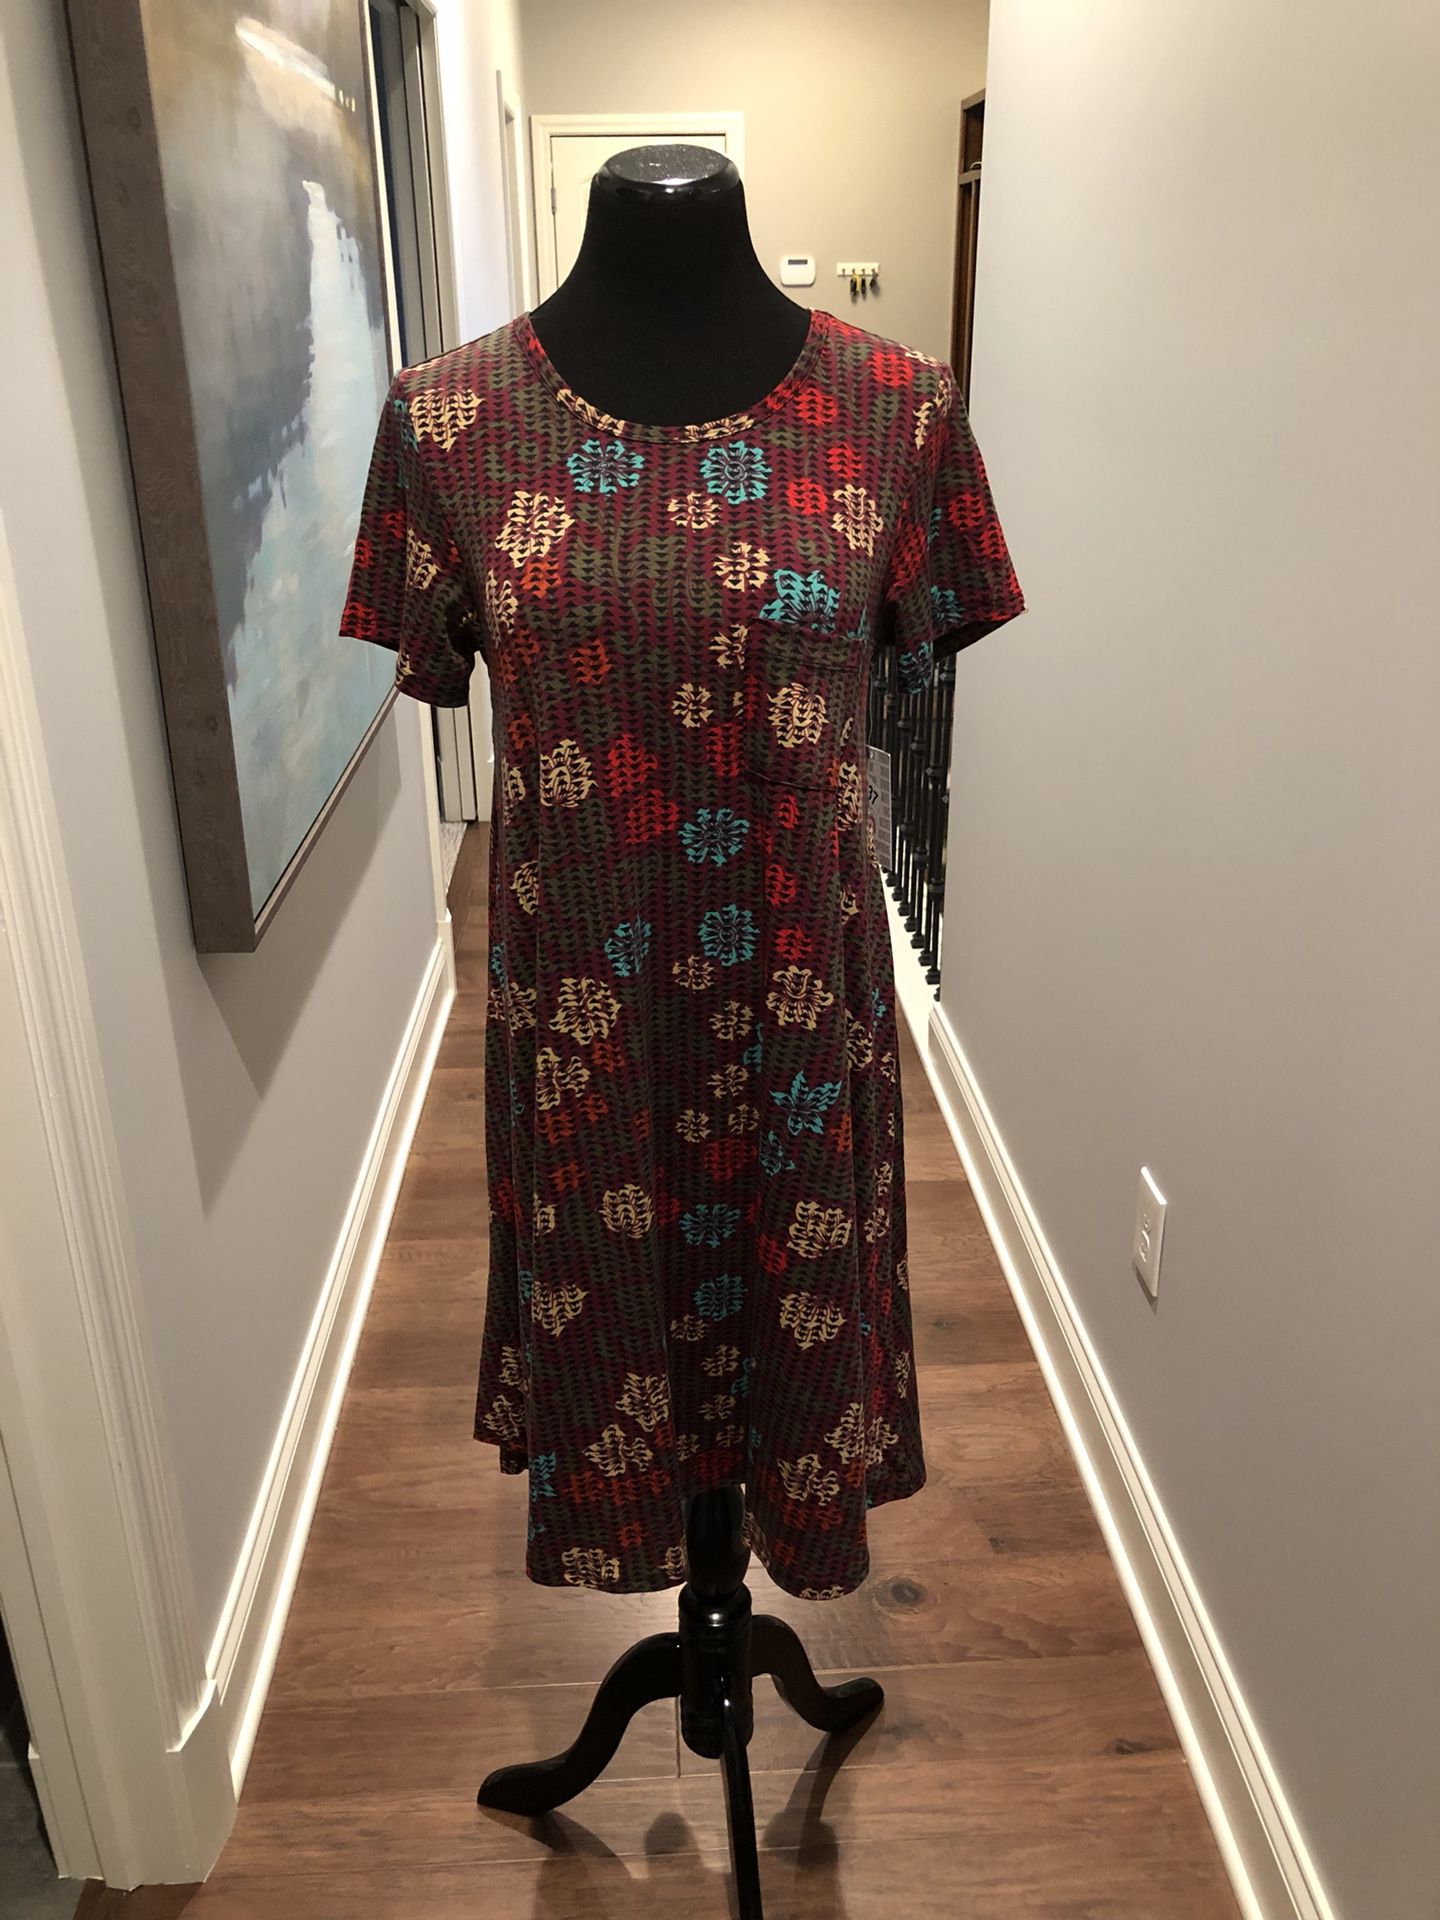 New With Tags, LuLaRoe Carly Dress, Size Small